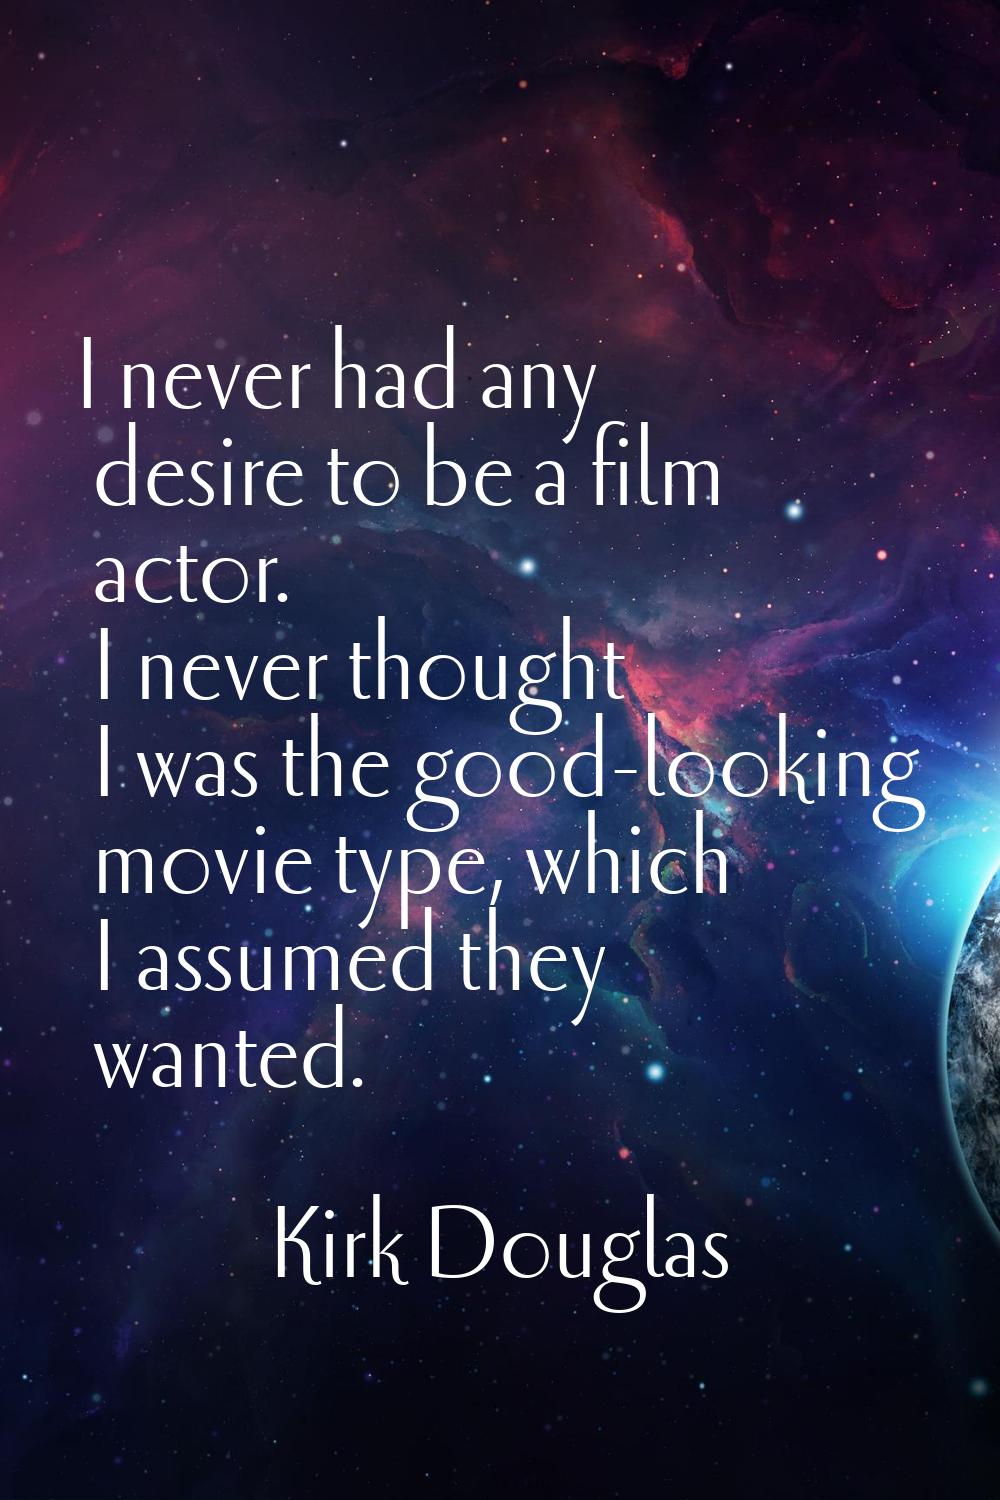 I never had any desire to be a film actor. I never thought I was the good-looking movie type, which